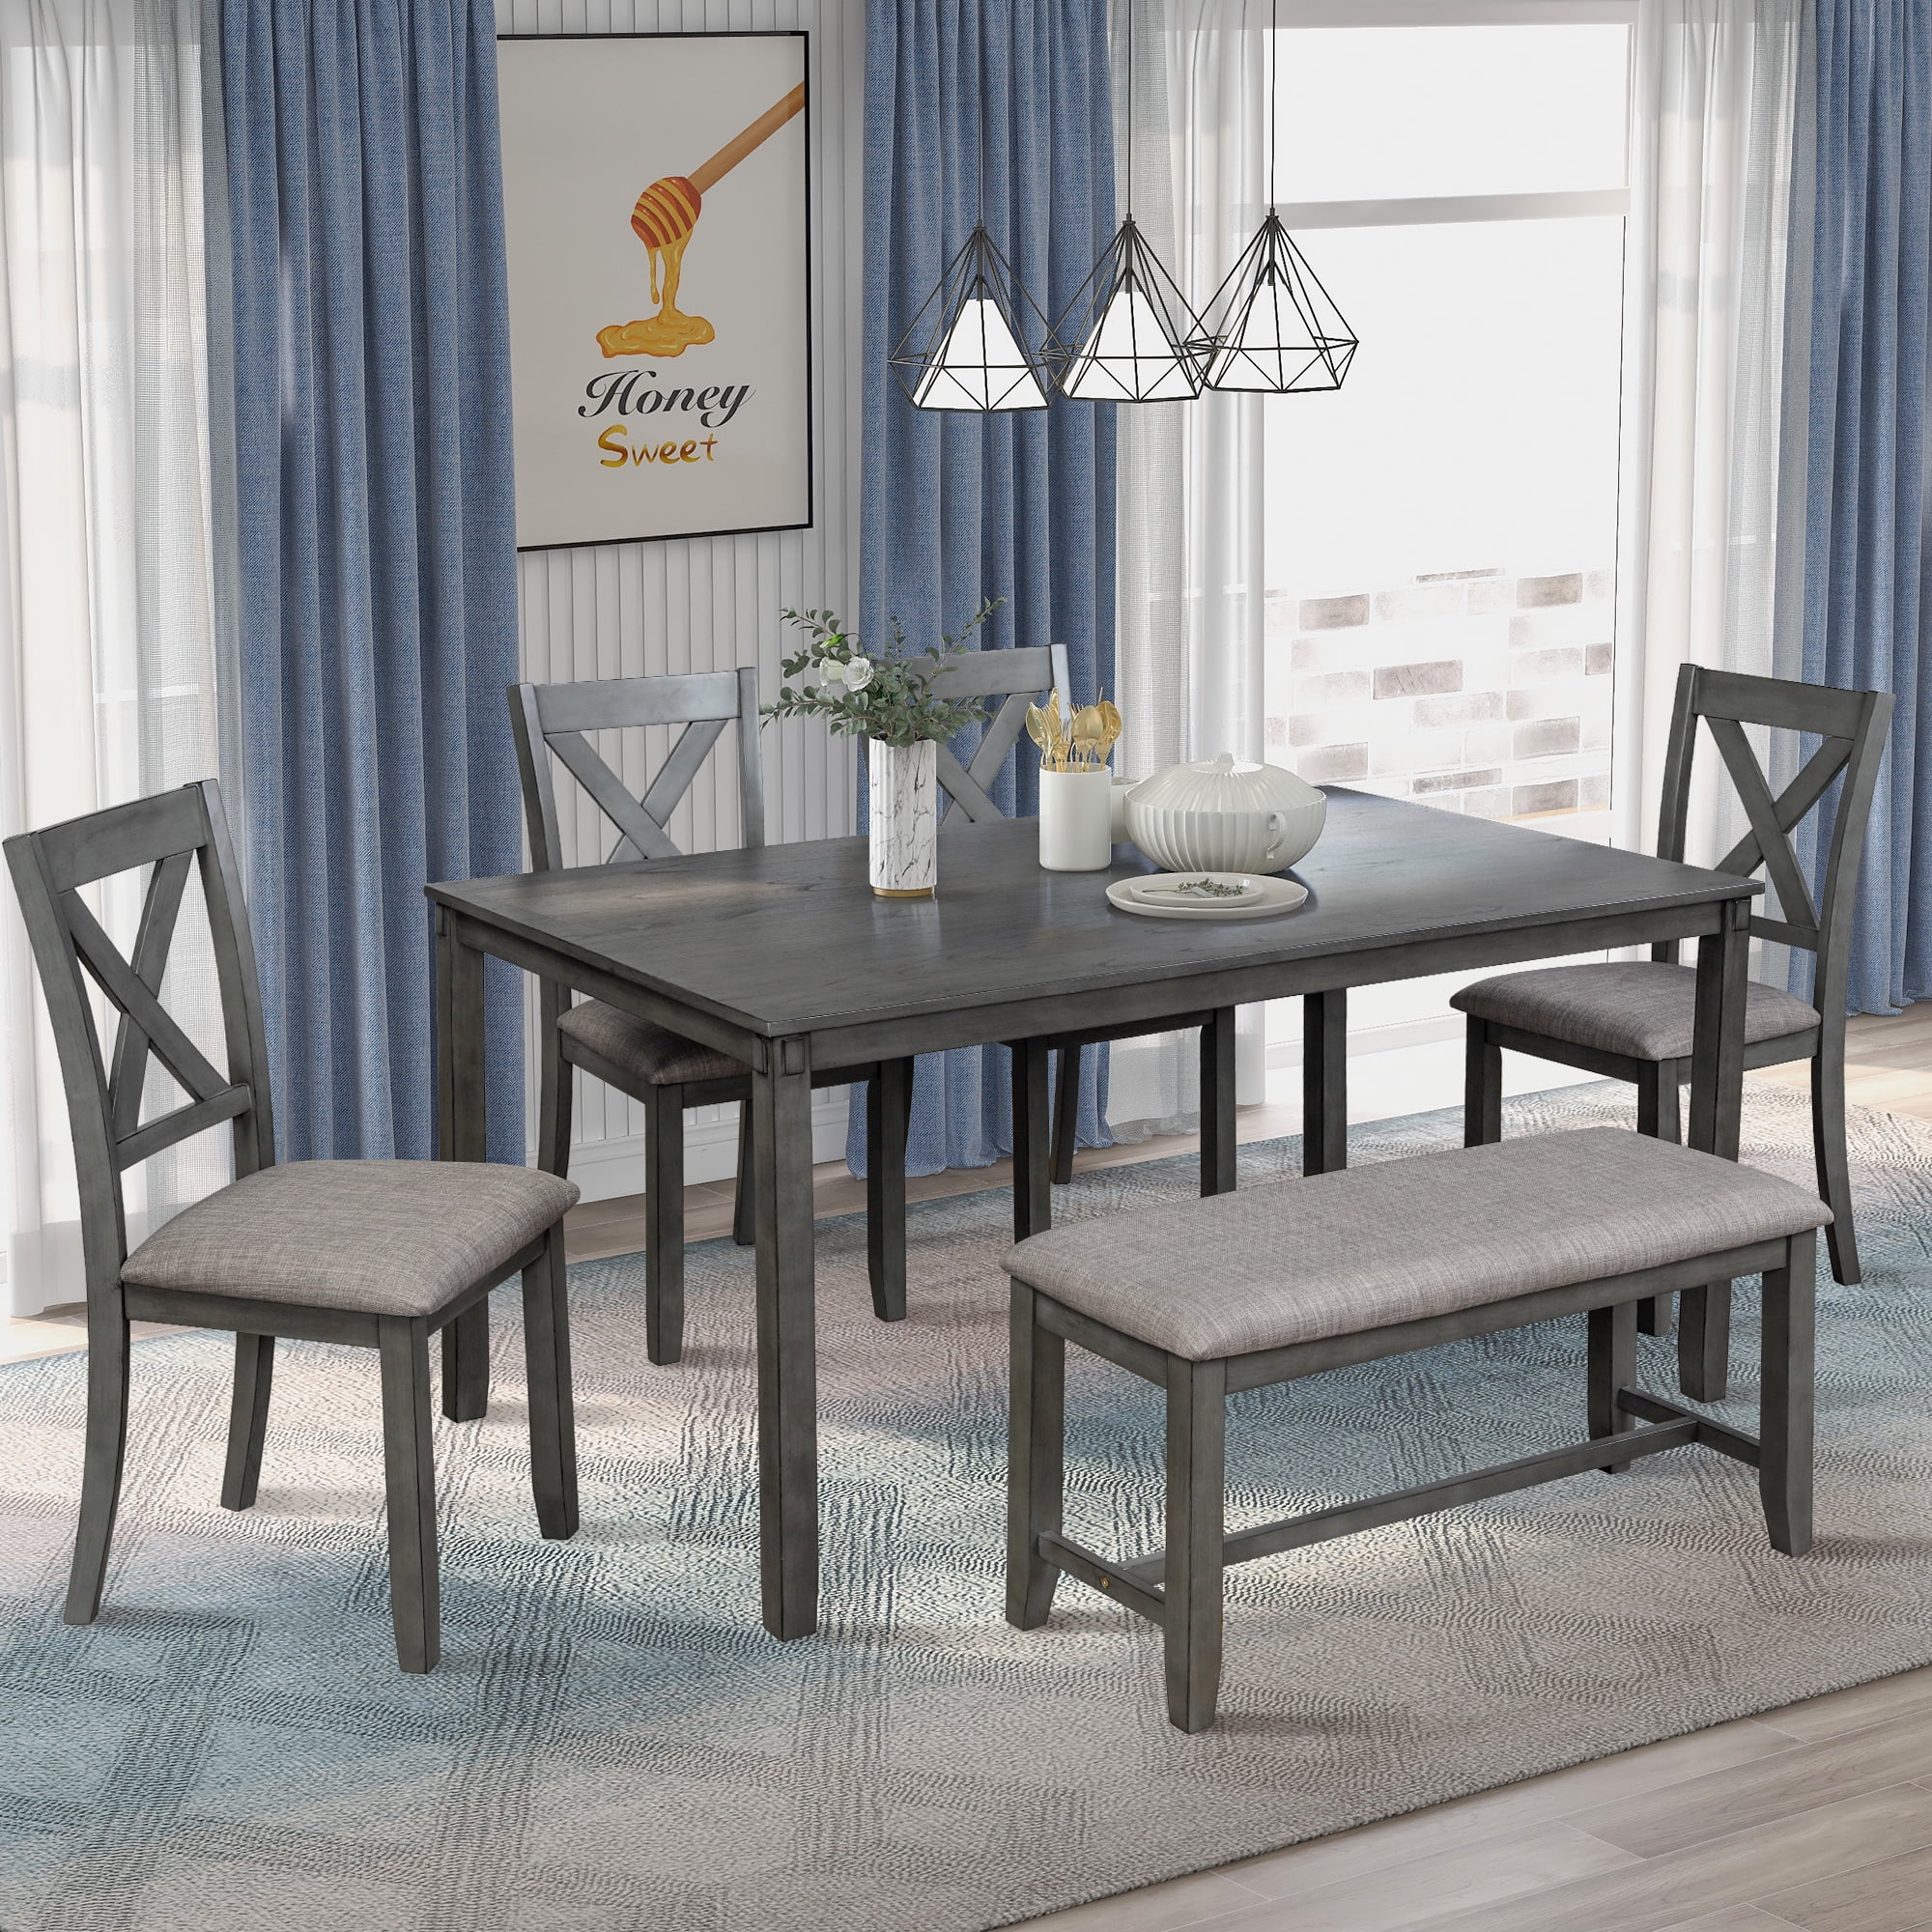 6 Piece Dining Table Set, Modern Home Dining Set with Table, Bench & 4